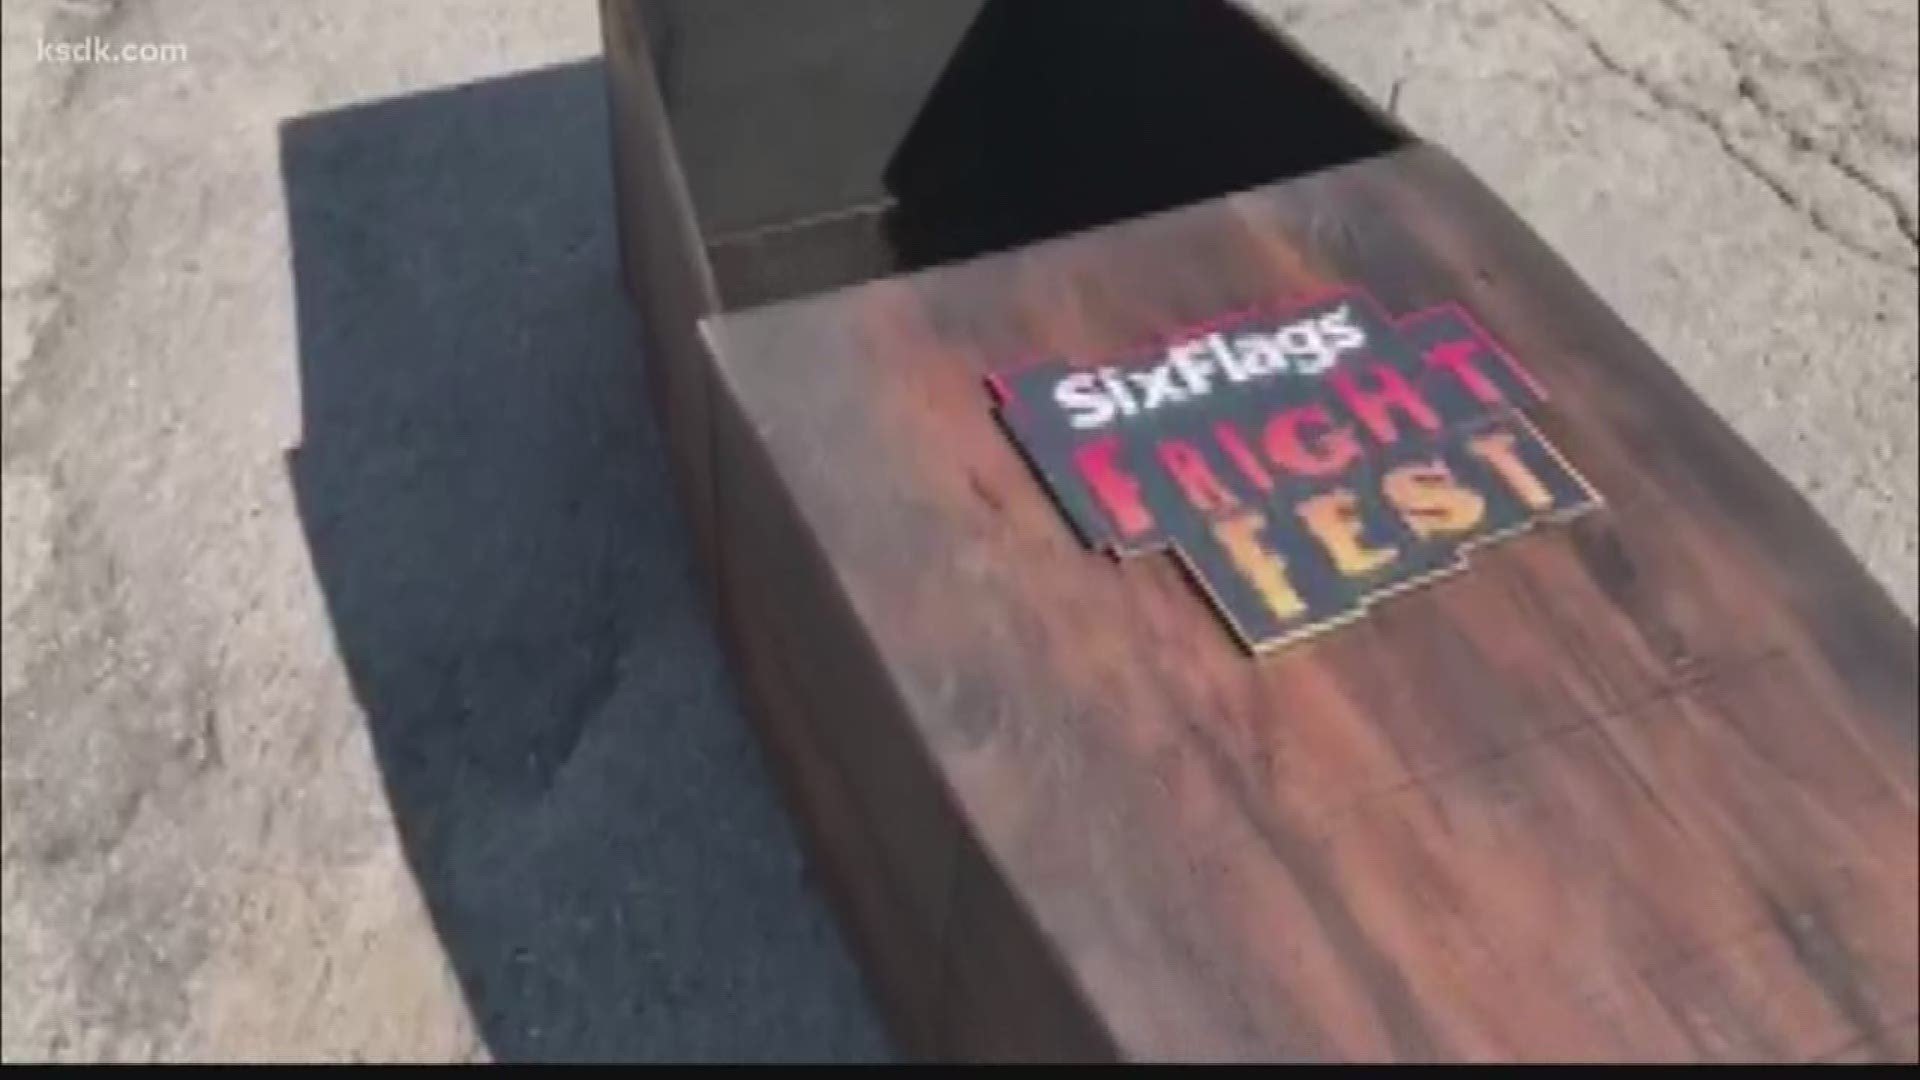 Meet the 6 people who will spend 30 hours in a coffin at Six Flags | mediakits.theygsgroup.com